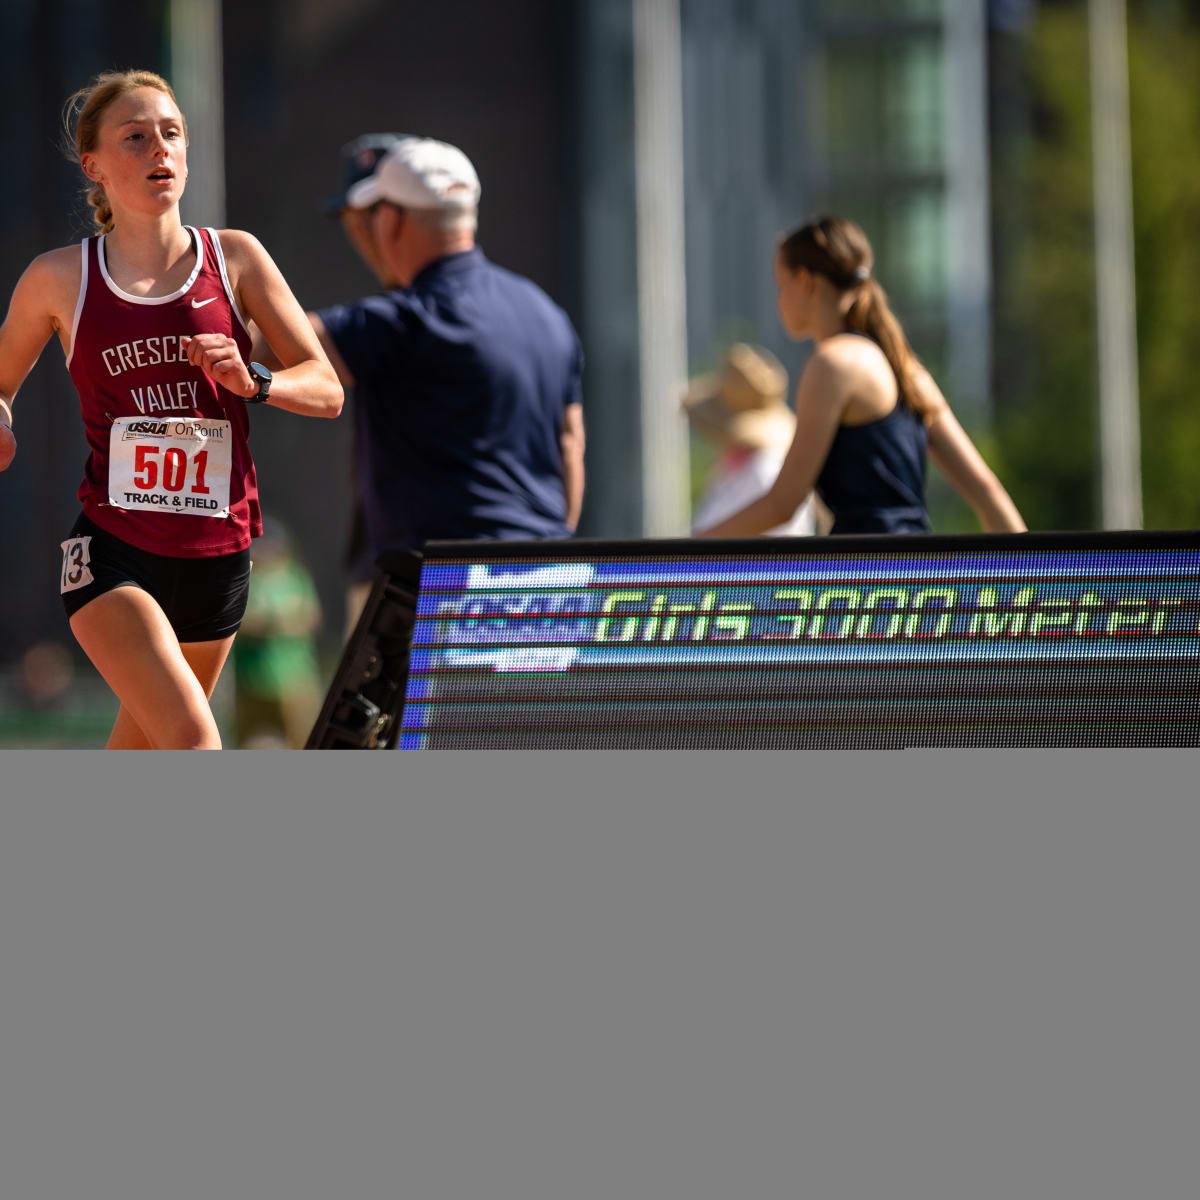  The Female Perspective on Varsity Distance Running (Home